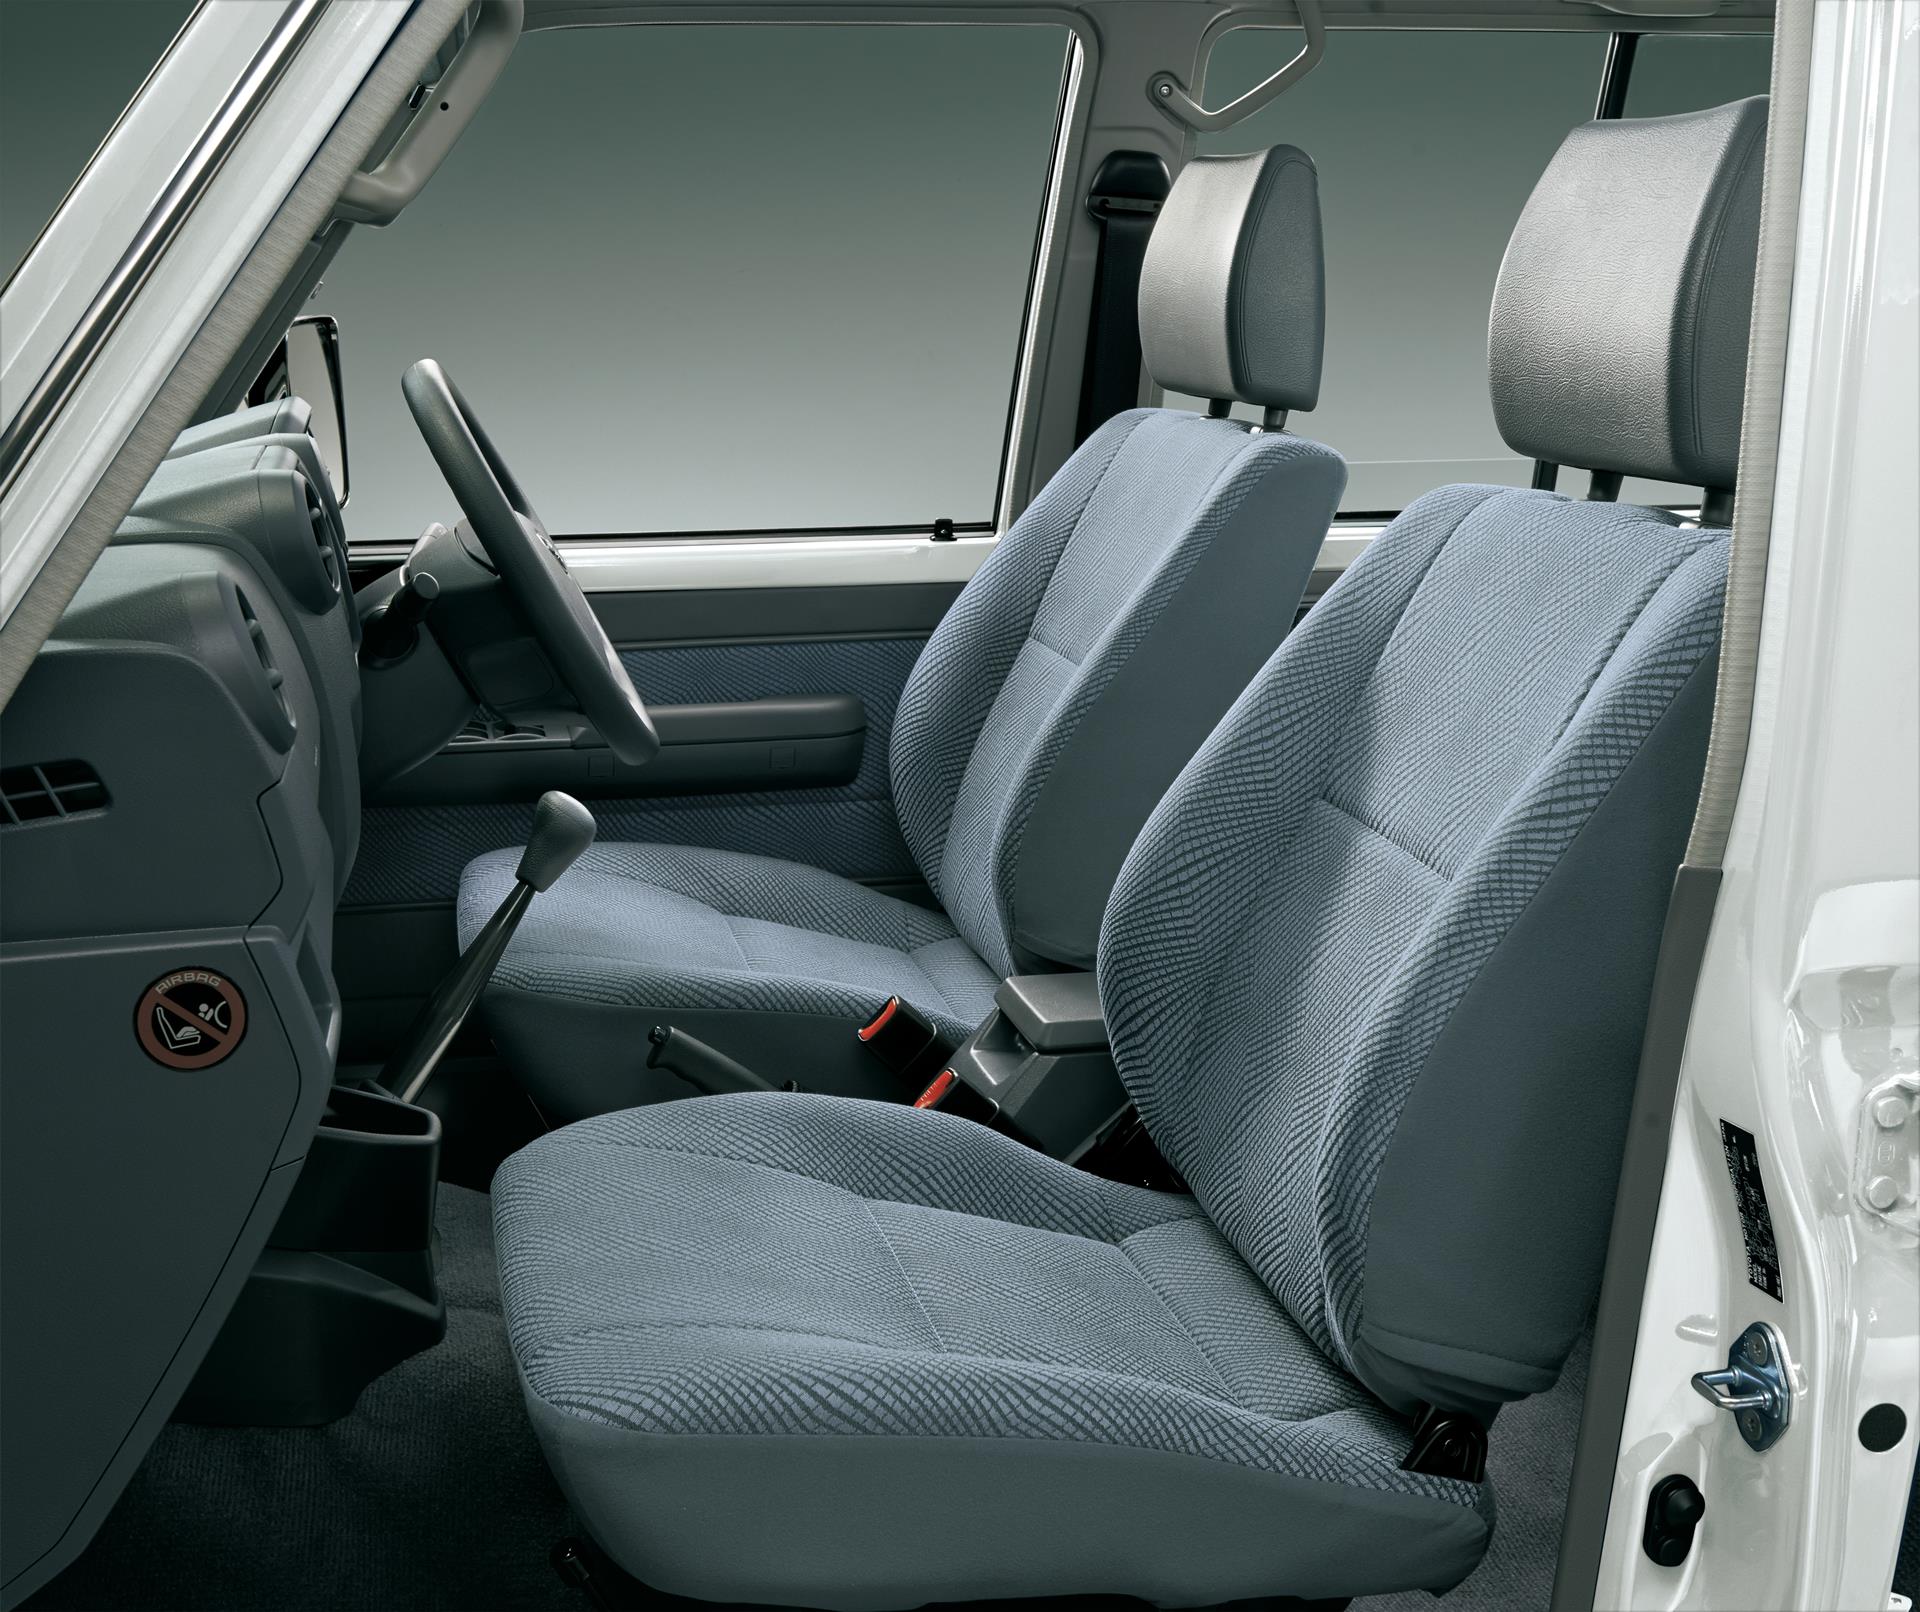 Land Cruiser 70 pickup interior (Japan commemorative re-release; with options)